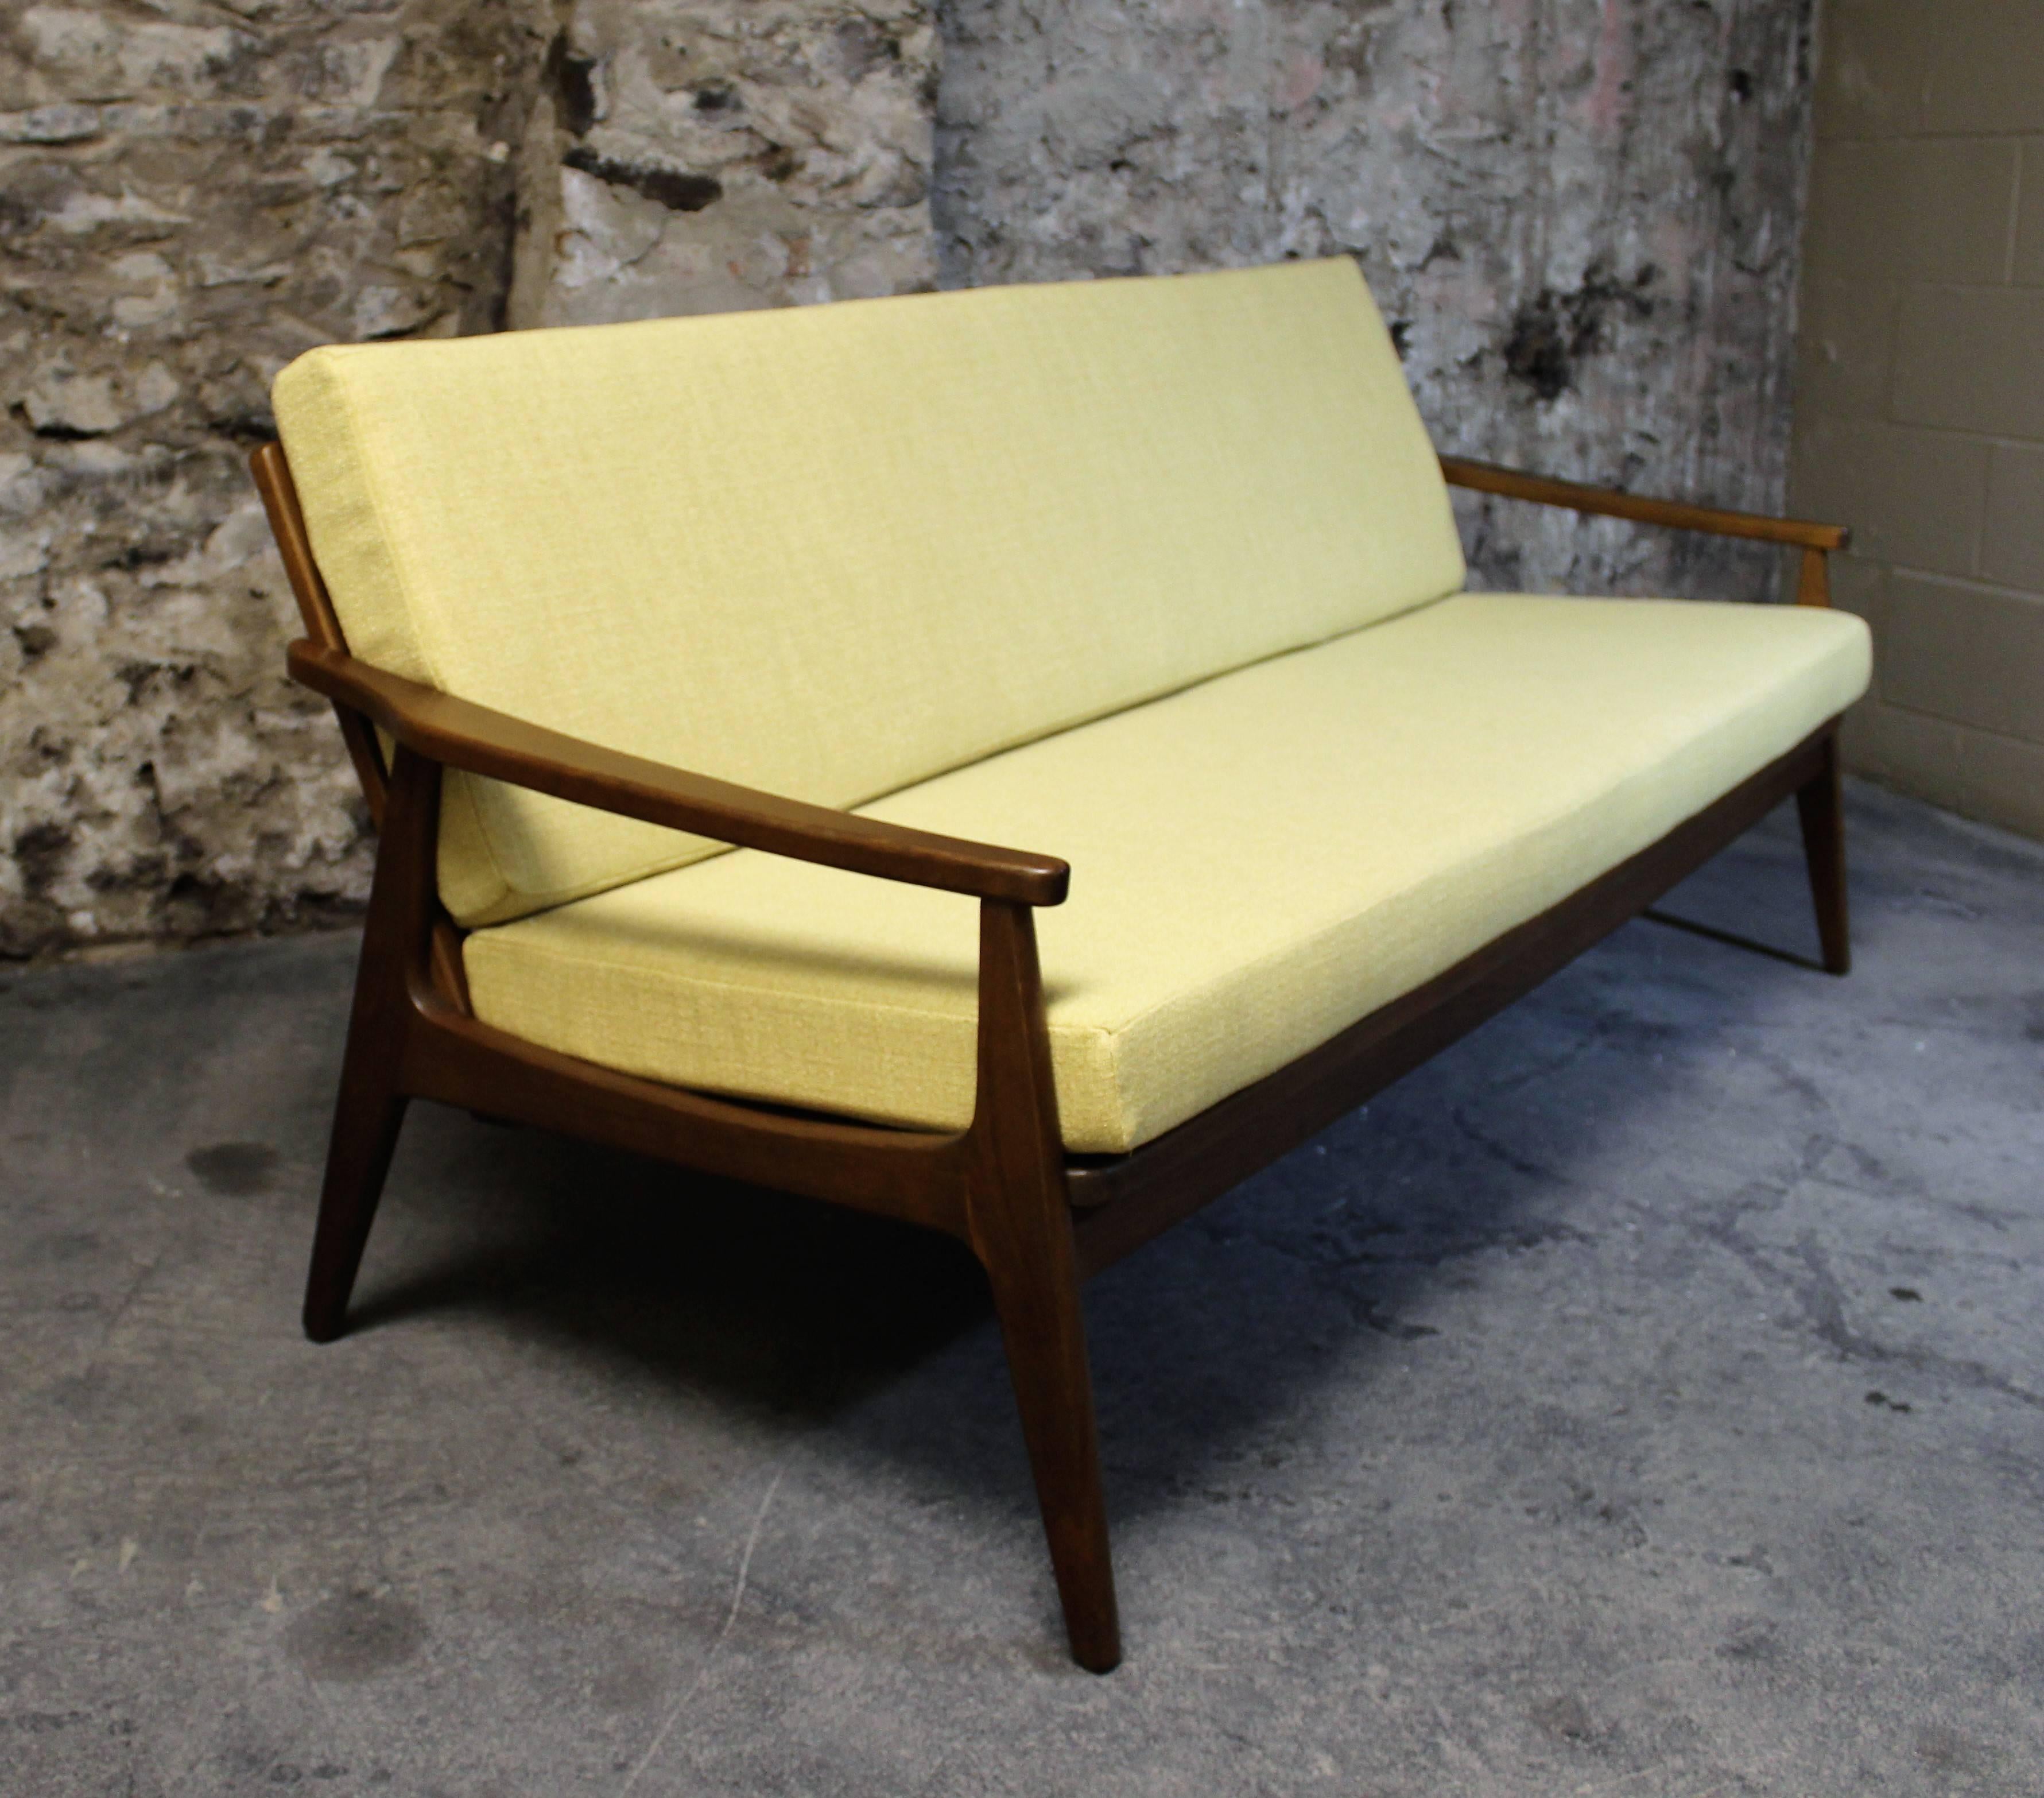 Mid-Century Modern sofa and chair with walnut frame and re-upholstered in yellow fabric.